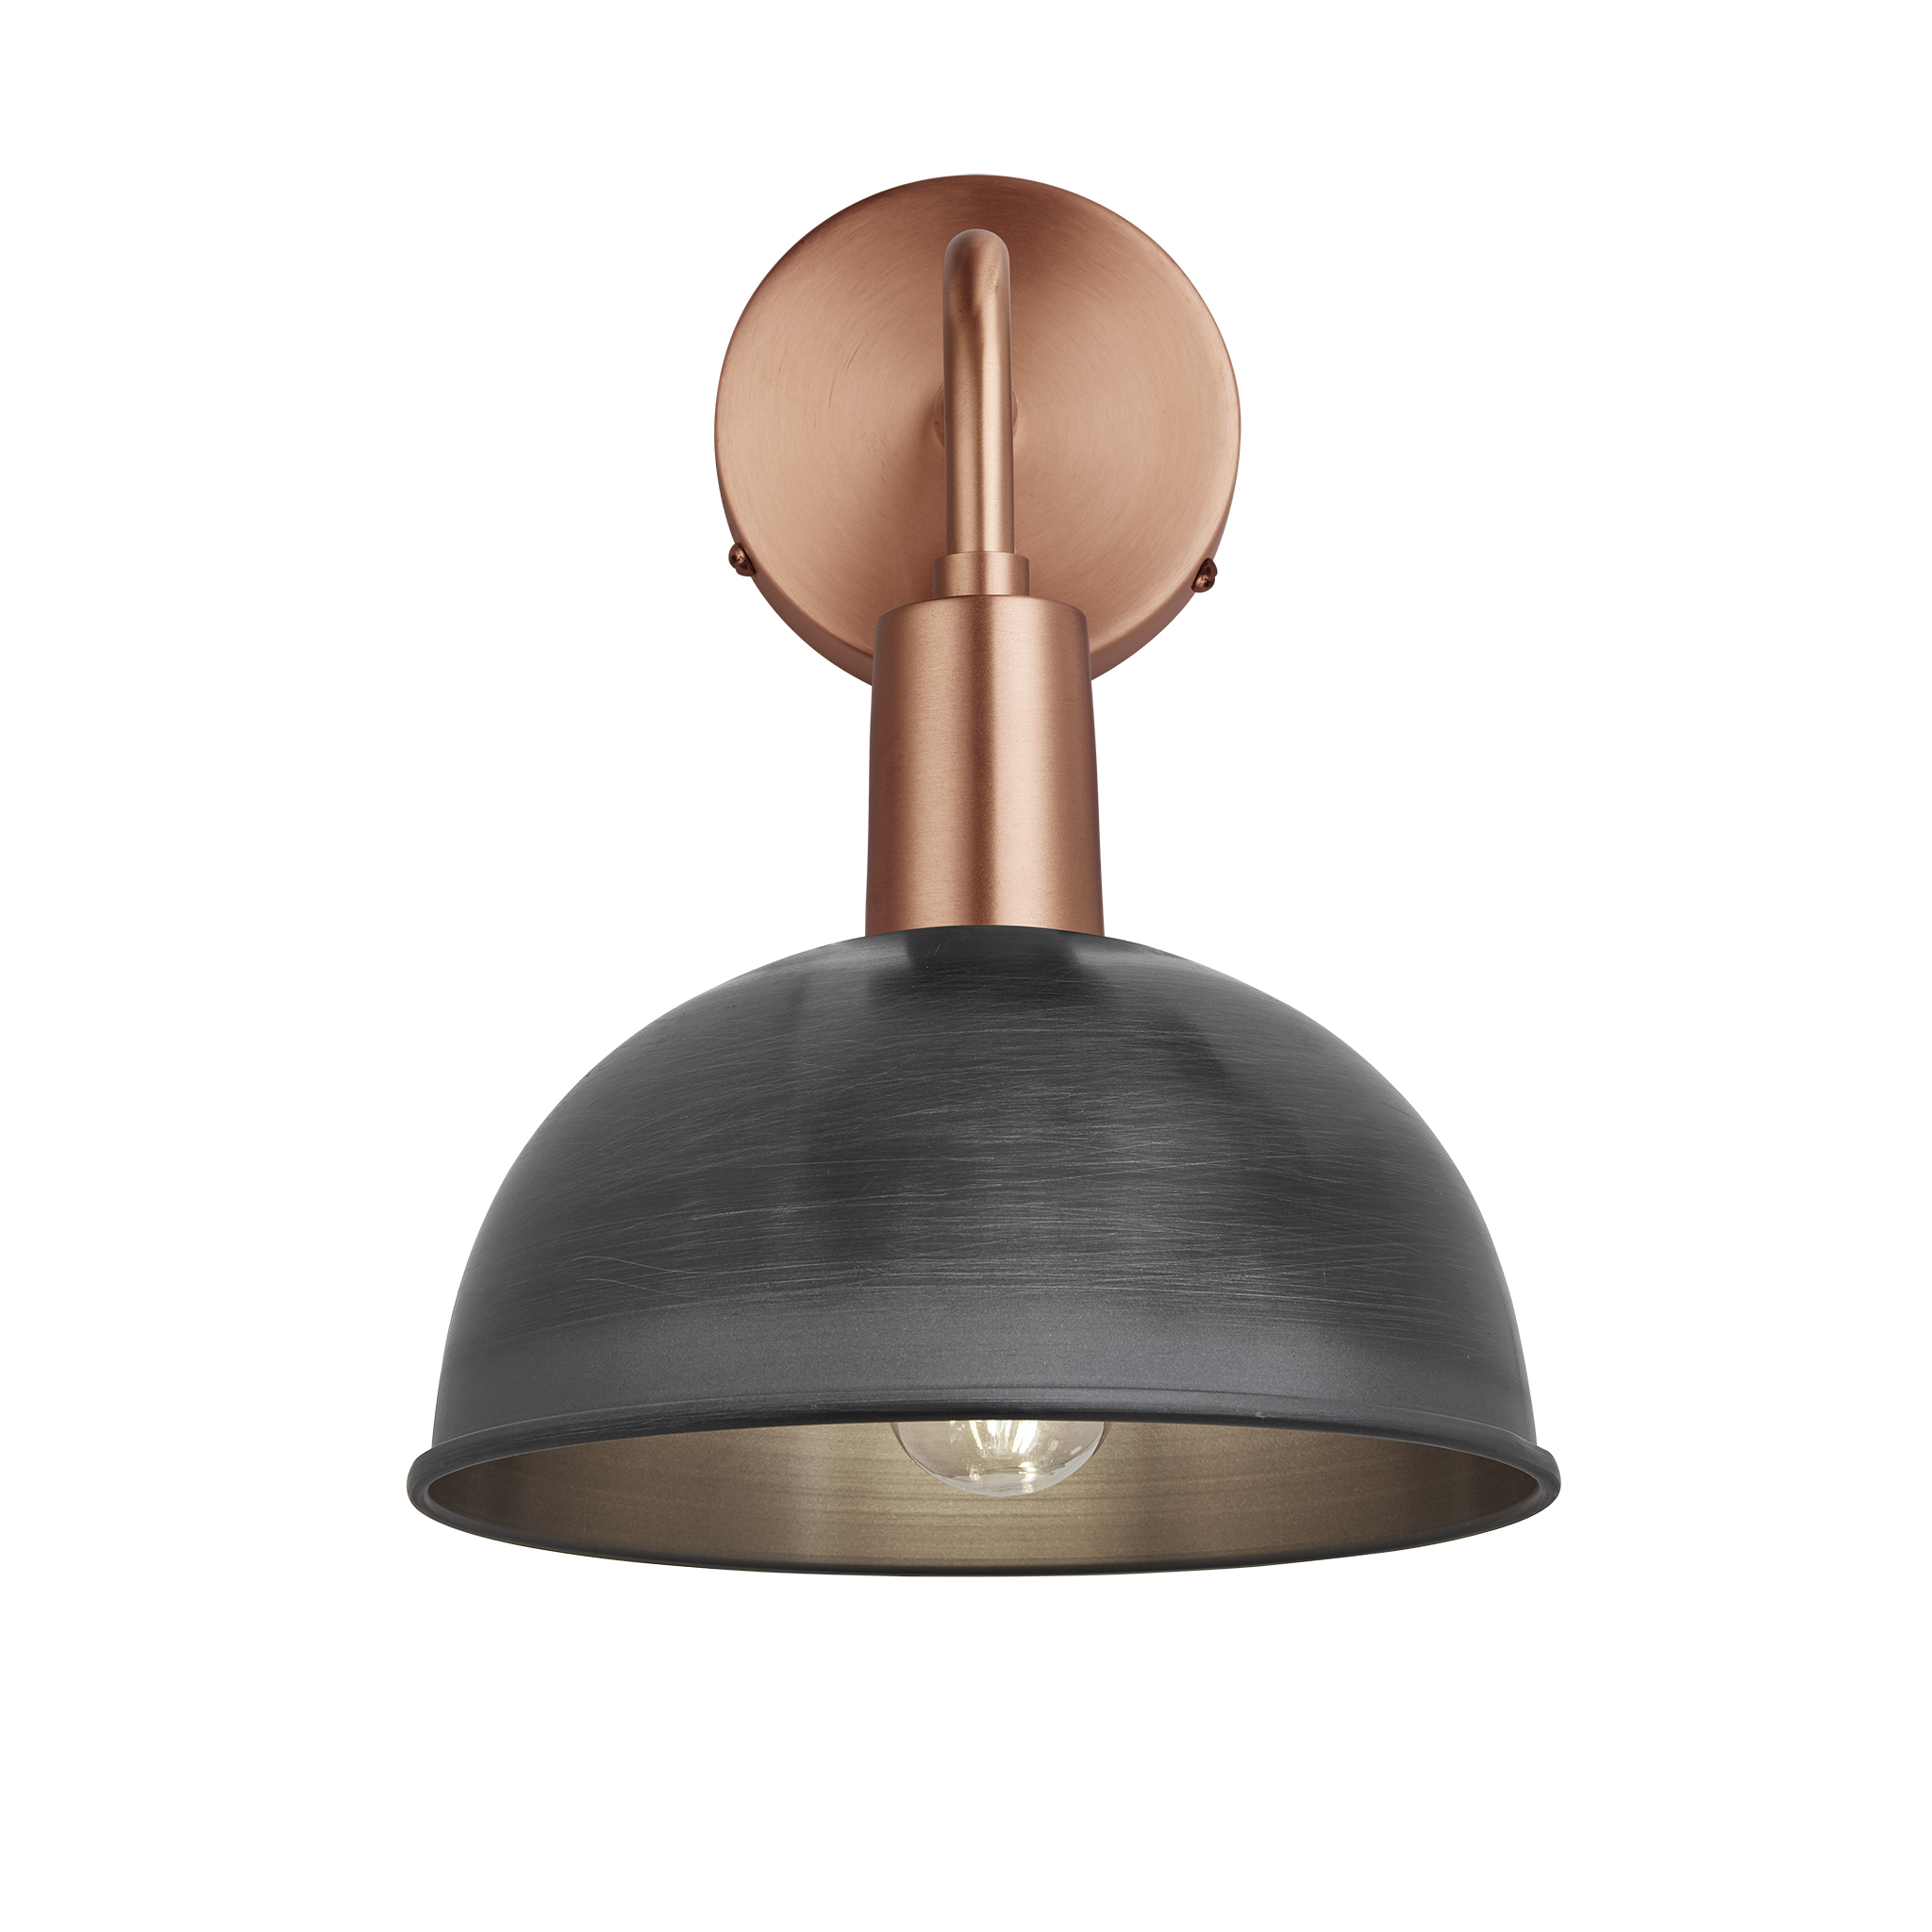  Sleek Dome Wall Light - 8 Inch - Pewter - Copper Holder